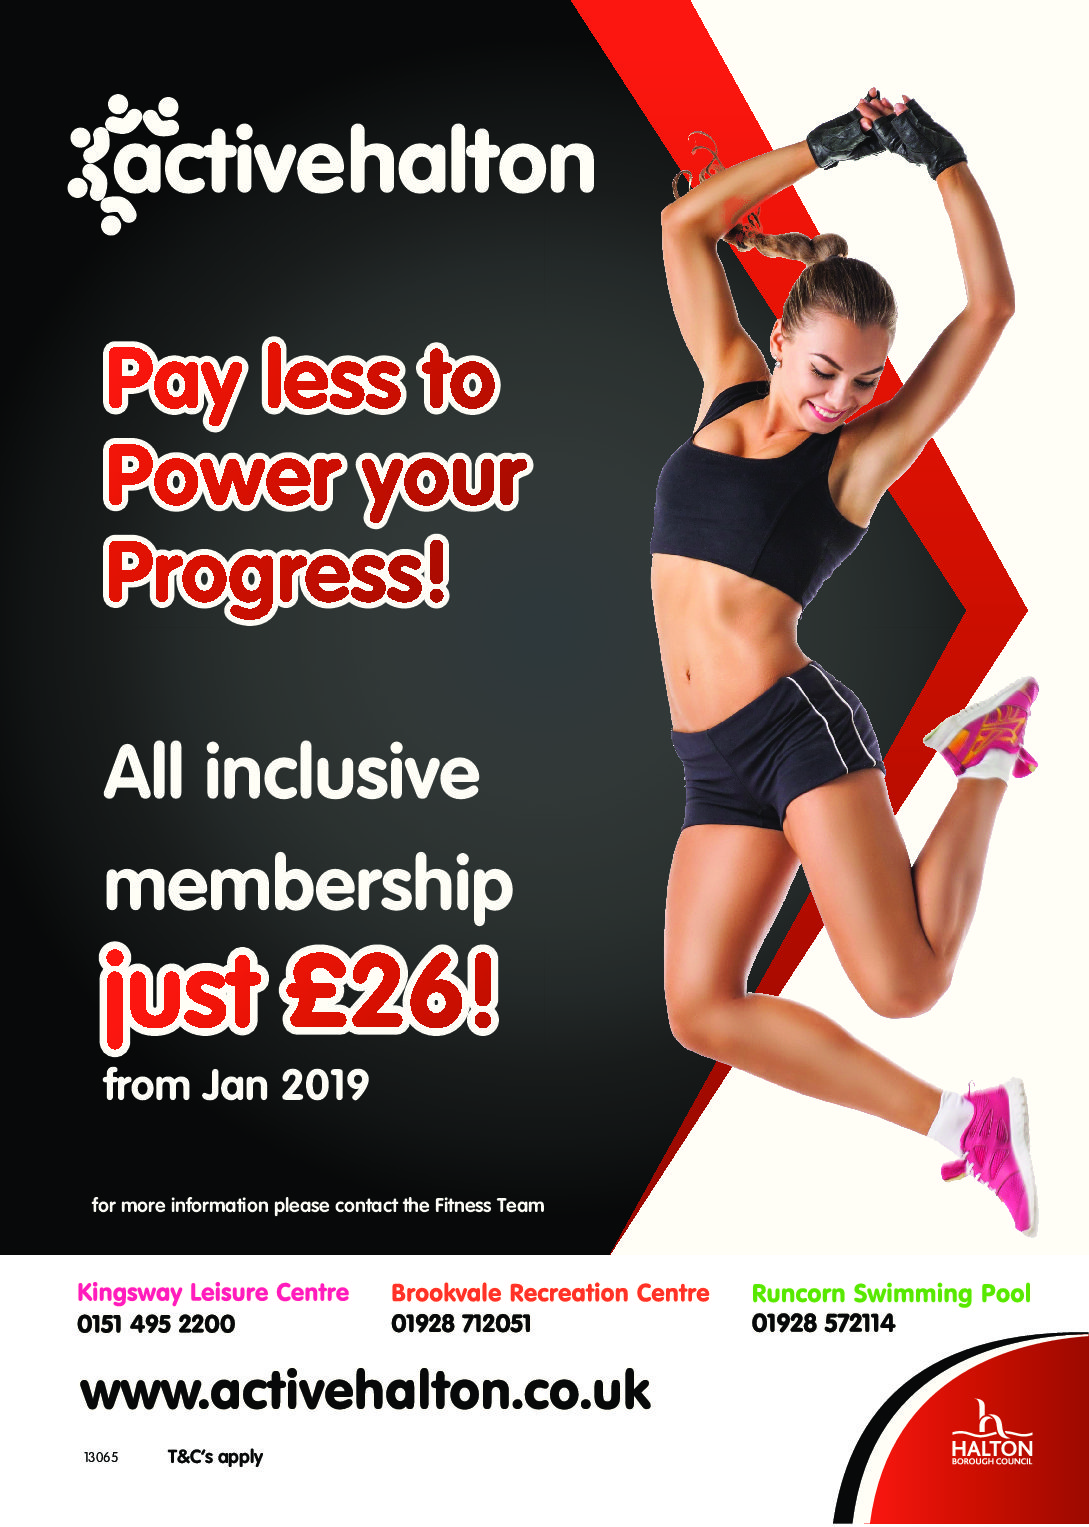 Pay less to get fit at Halton’s leisure centres